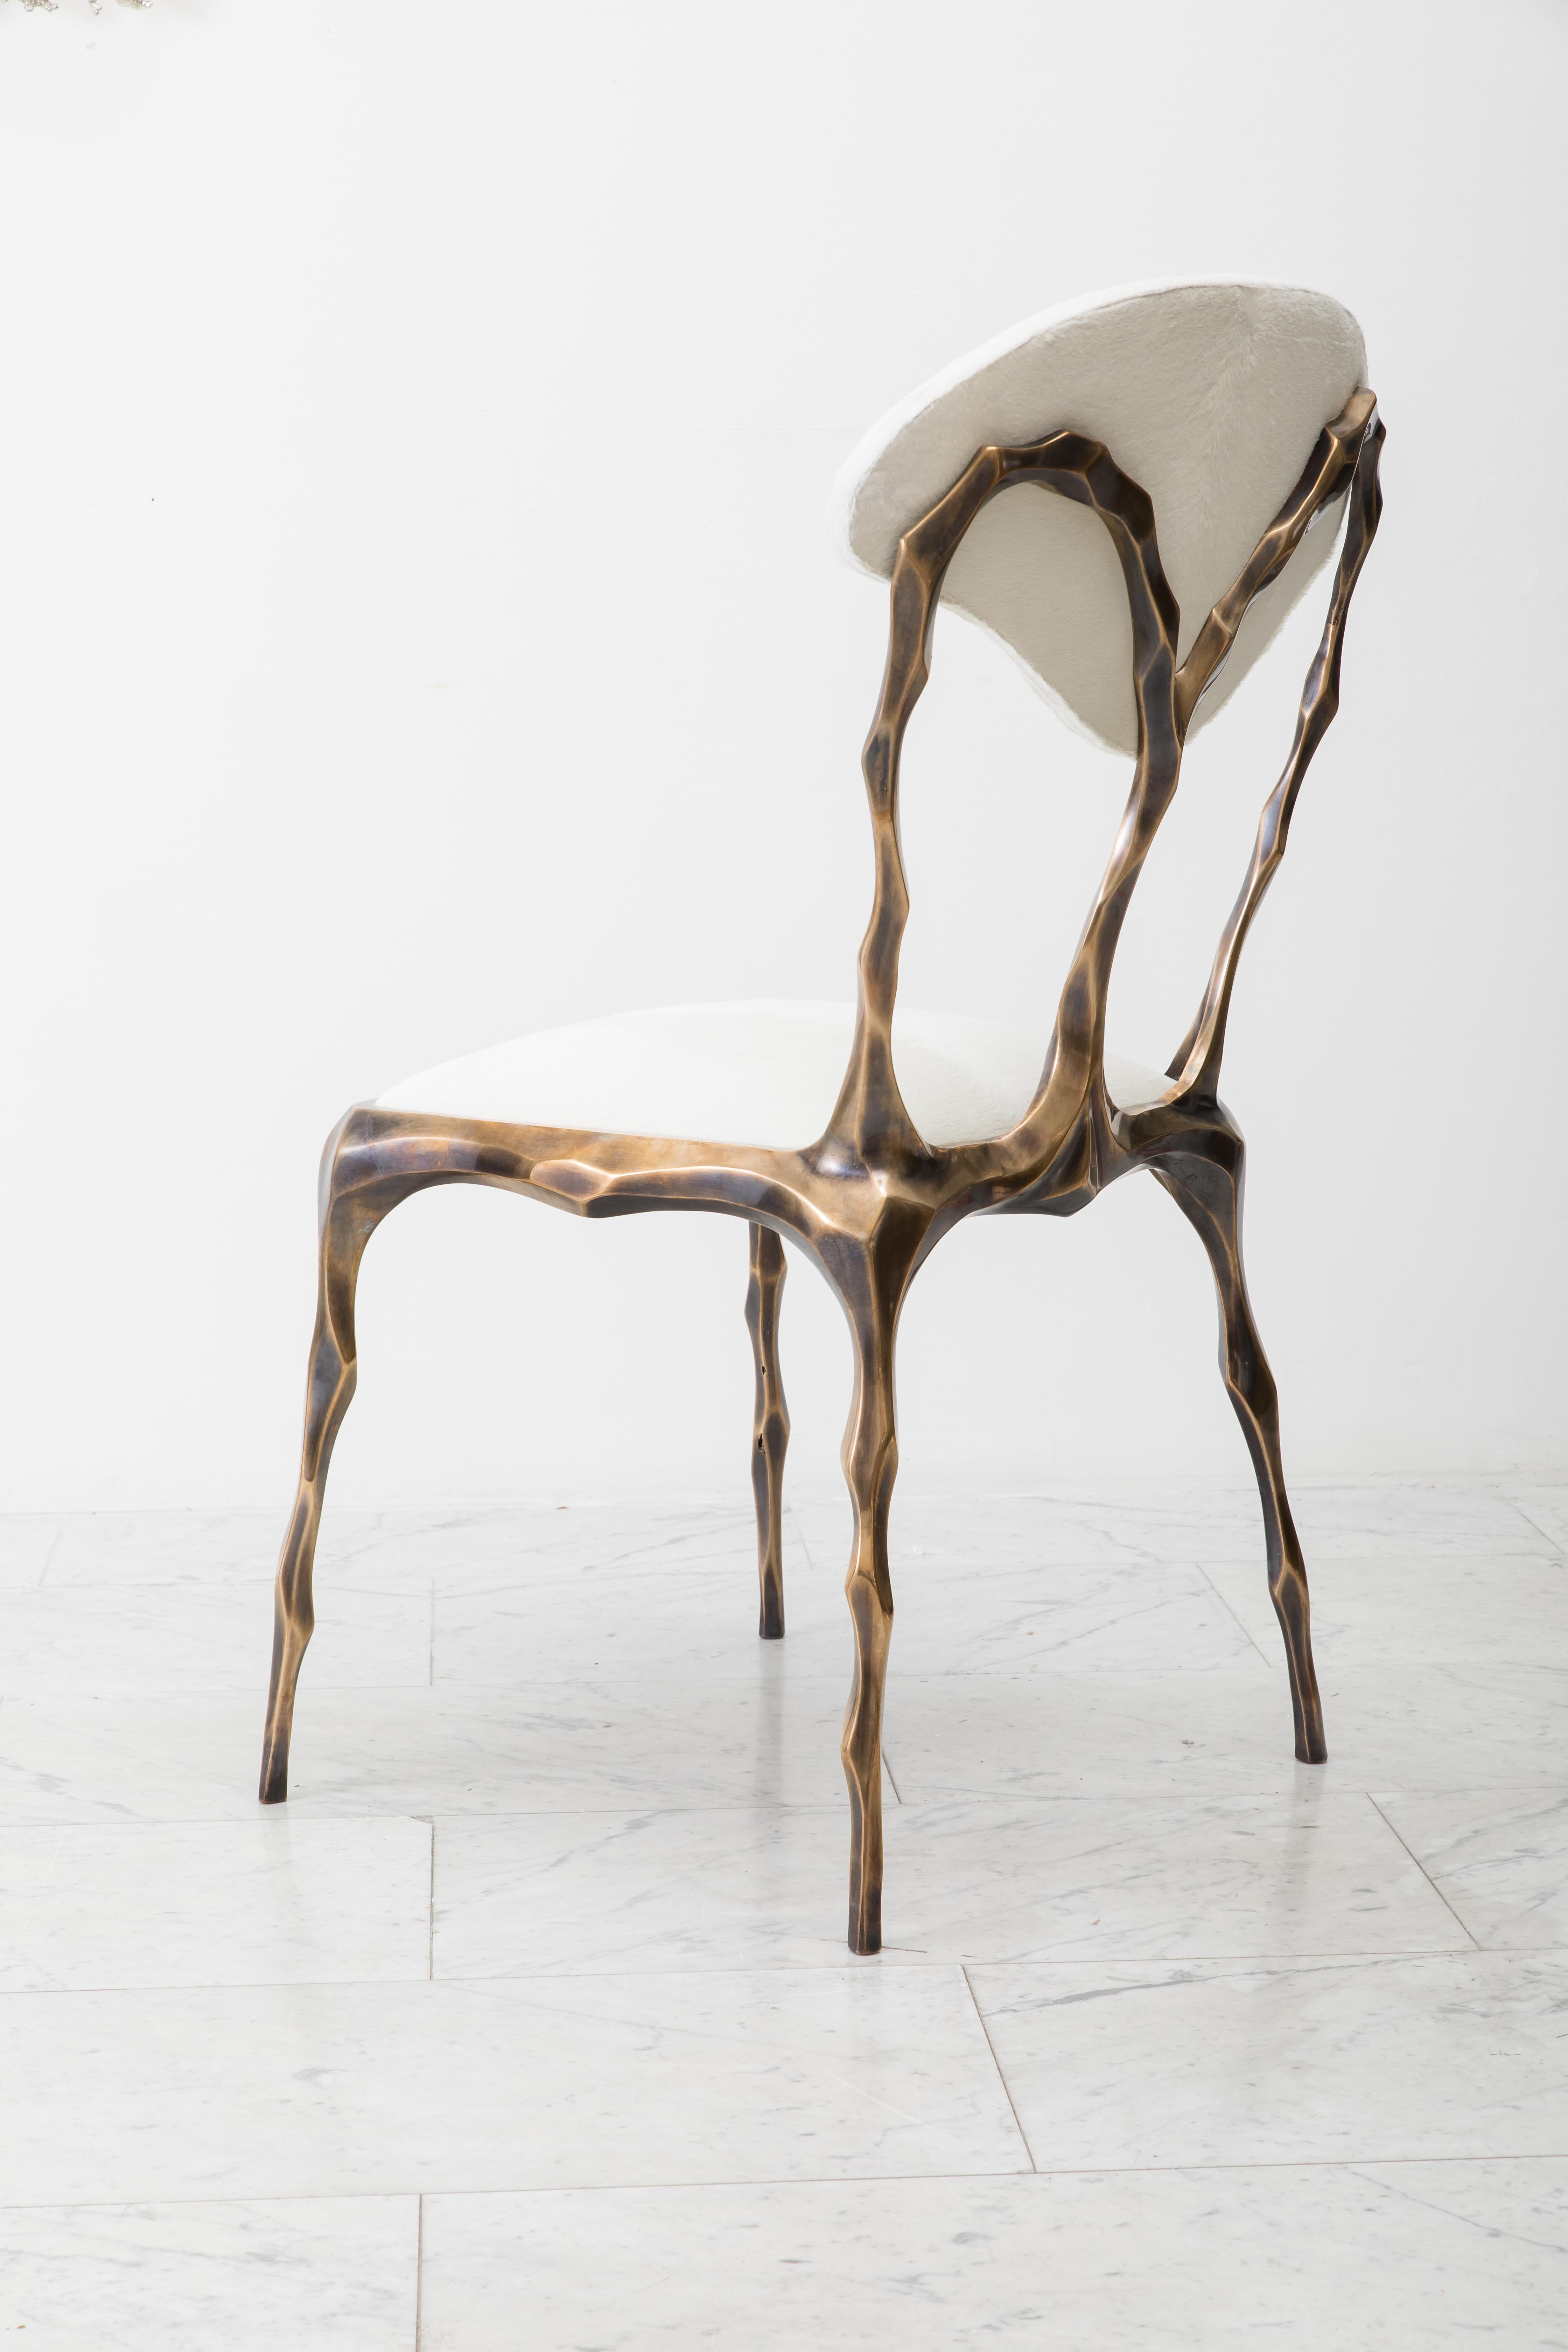 Taking inspiration from the twisting forms of seaweed and other natural materials, Haase hand-carves each element of his unique dining chair before casting it in his New York City Studio. The bronze components are then welded together by the artist